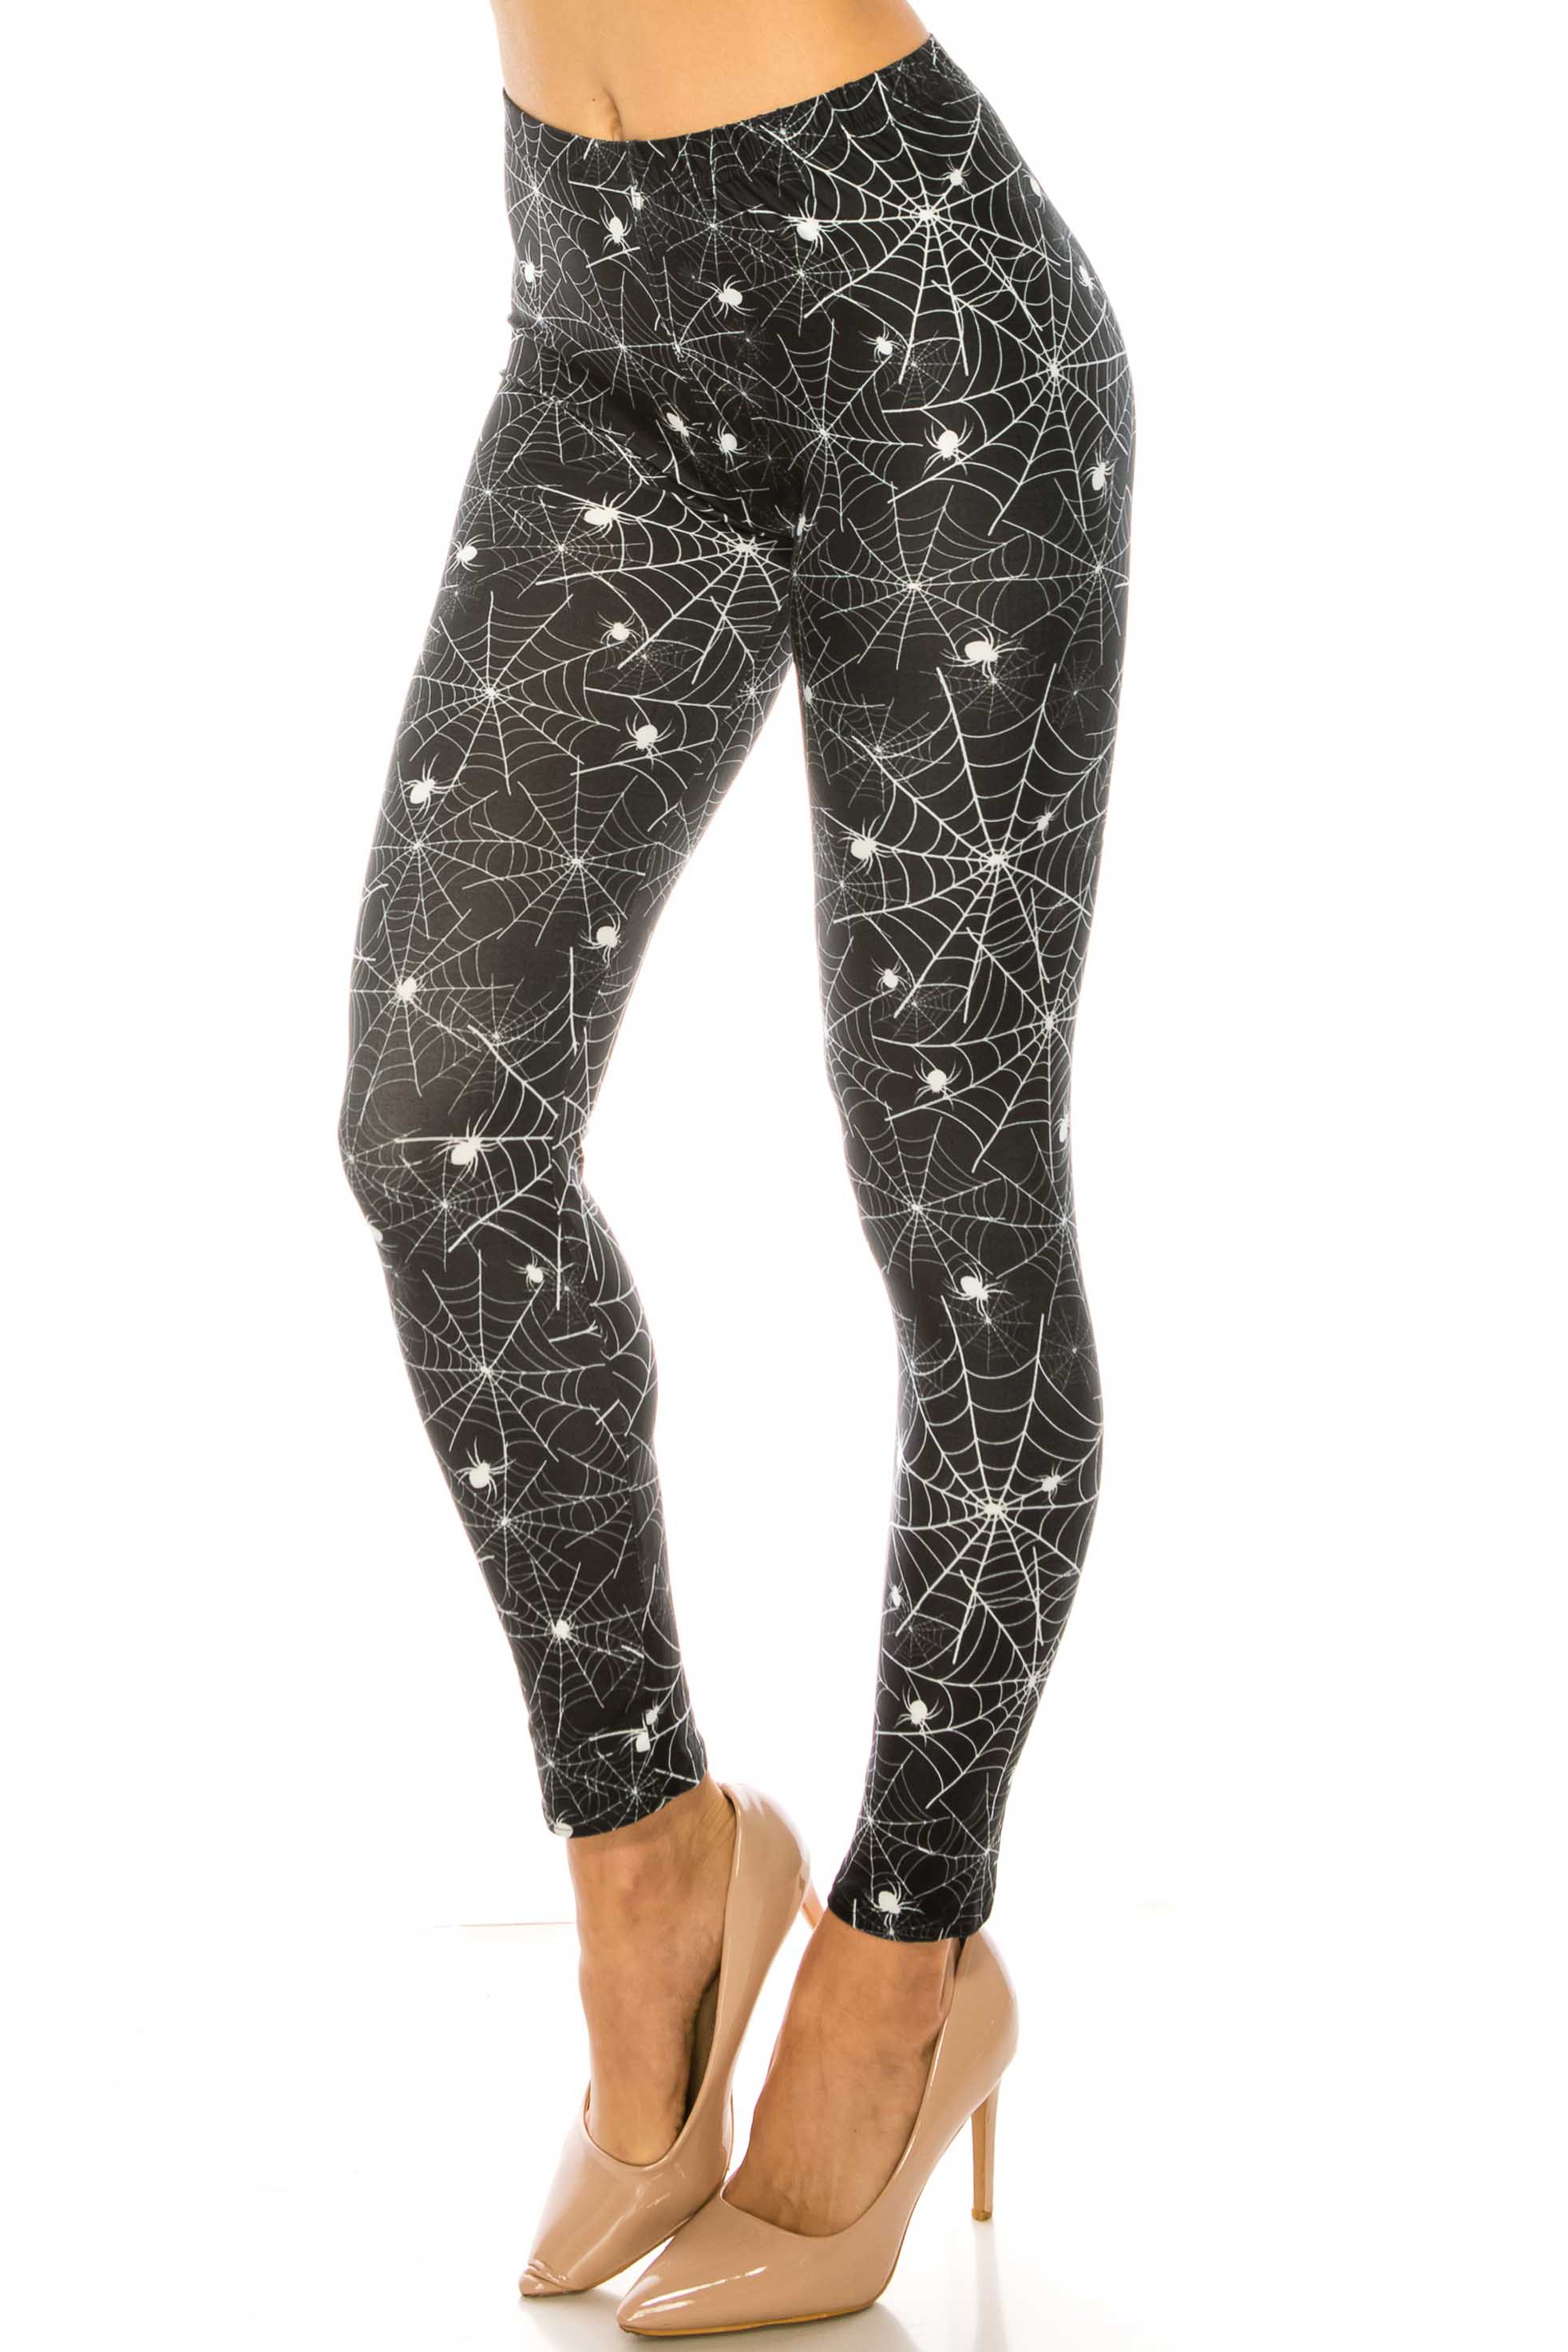 Wholesale Creamy Soft Spiders and Spiderwebs Kids Leggings - USA Fashion™